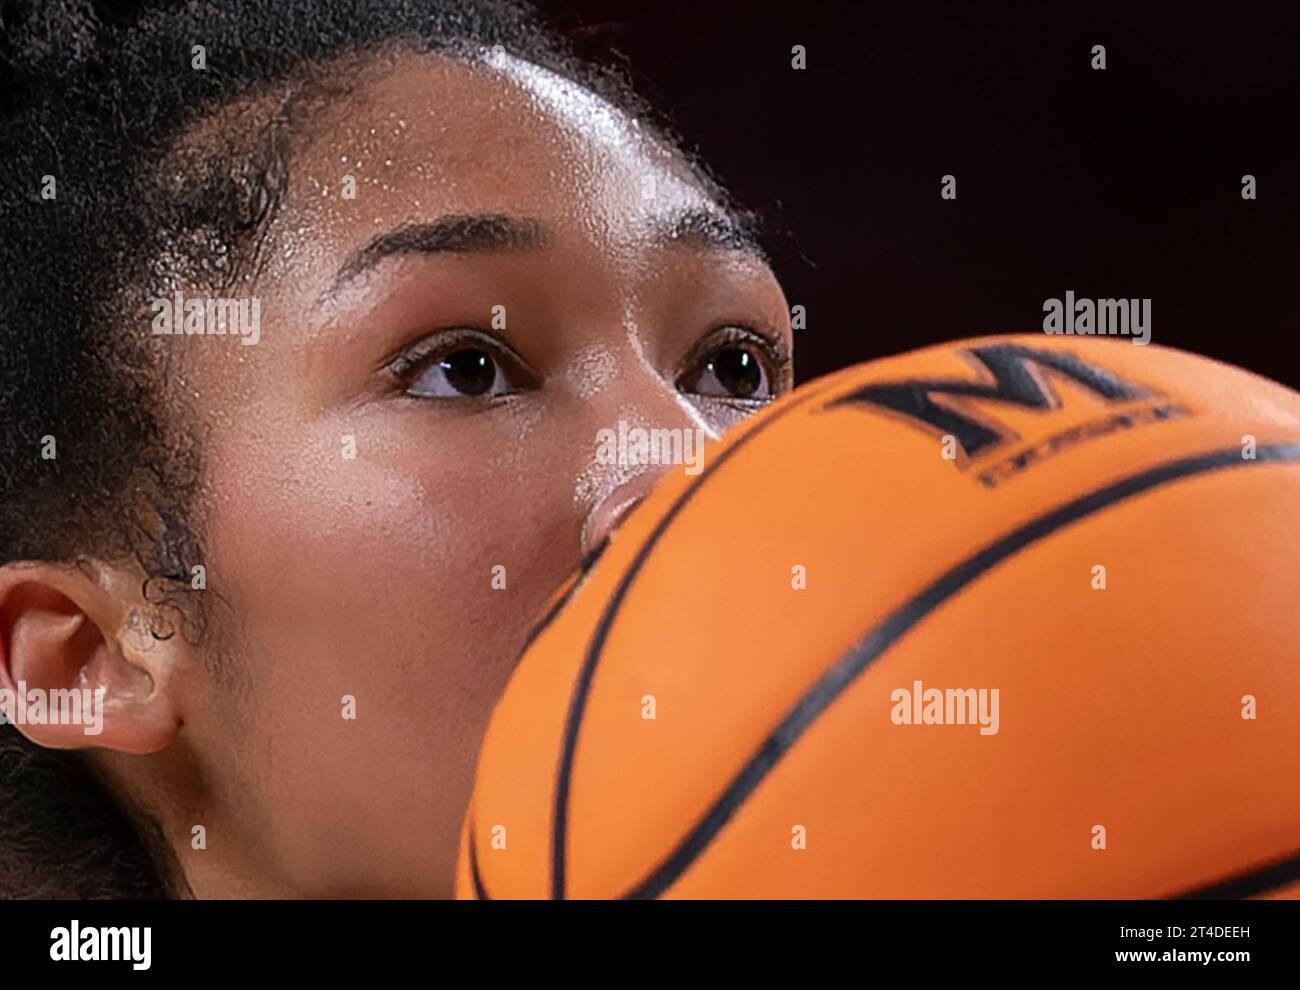 A female basketball player at the free throw line Stock Photo